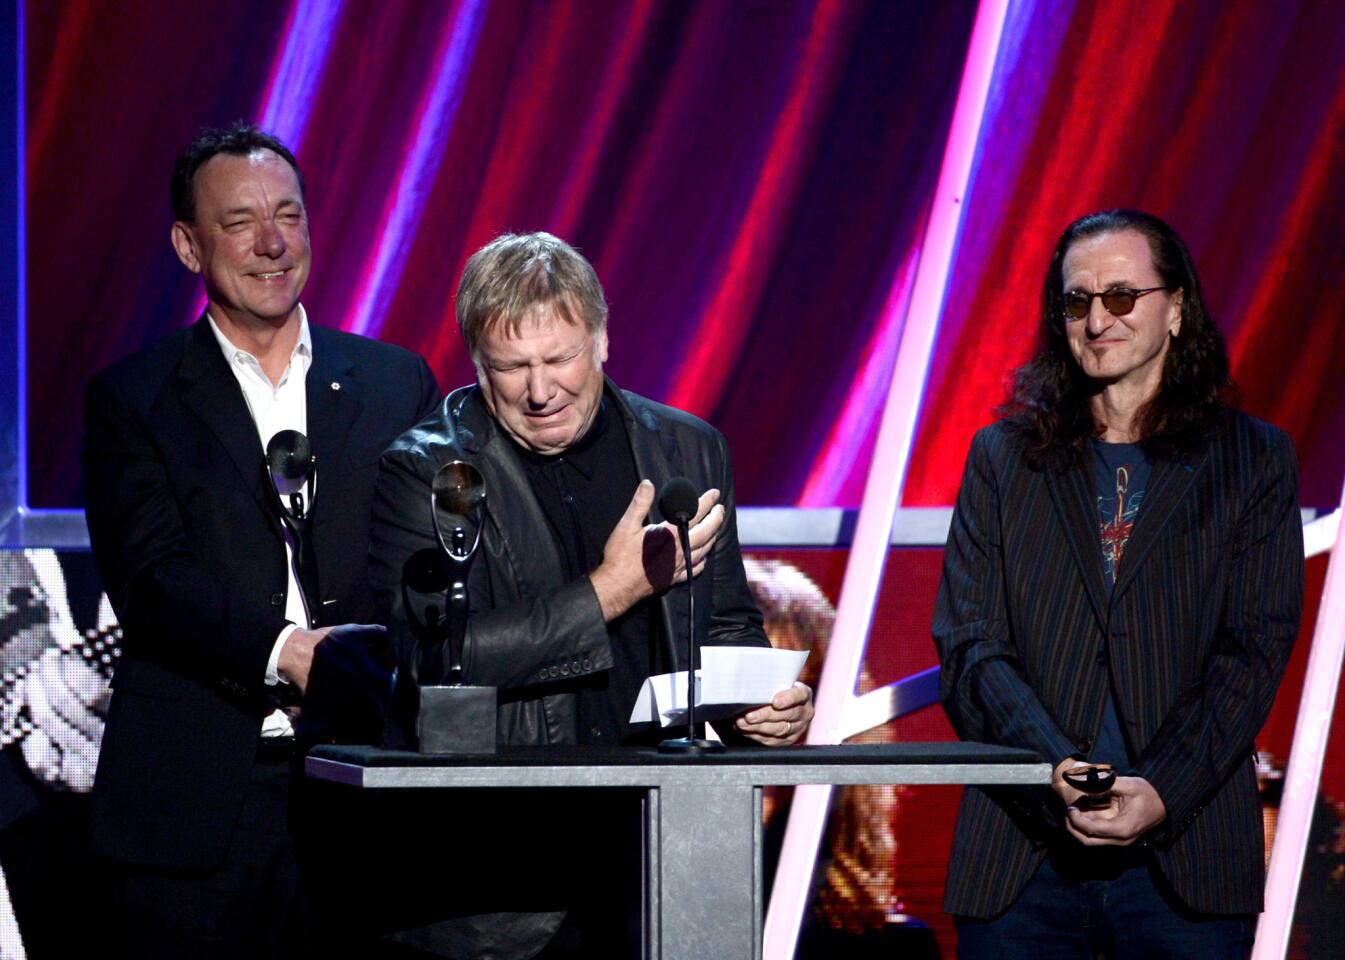 Rock Hall of Fame induction